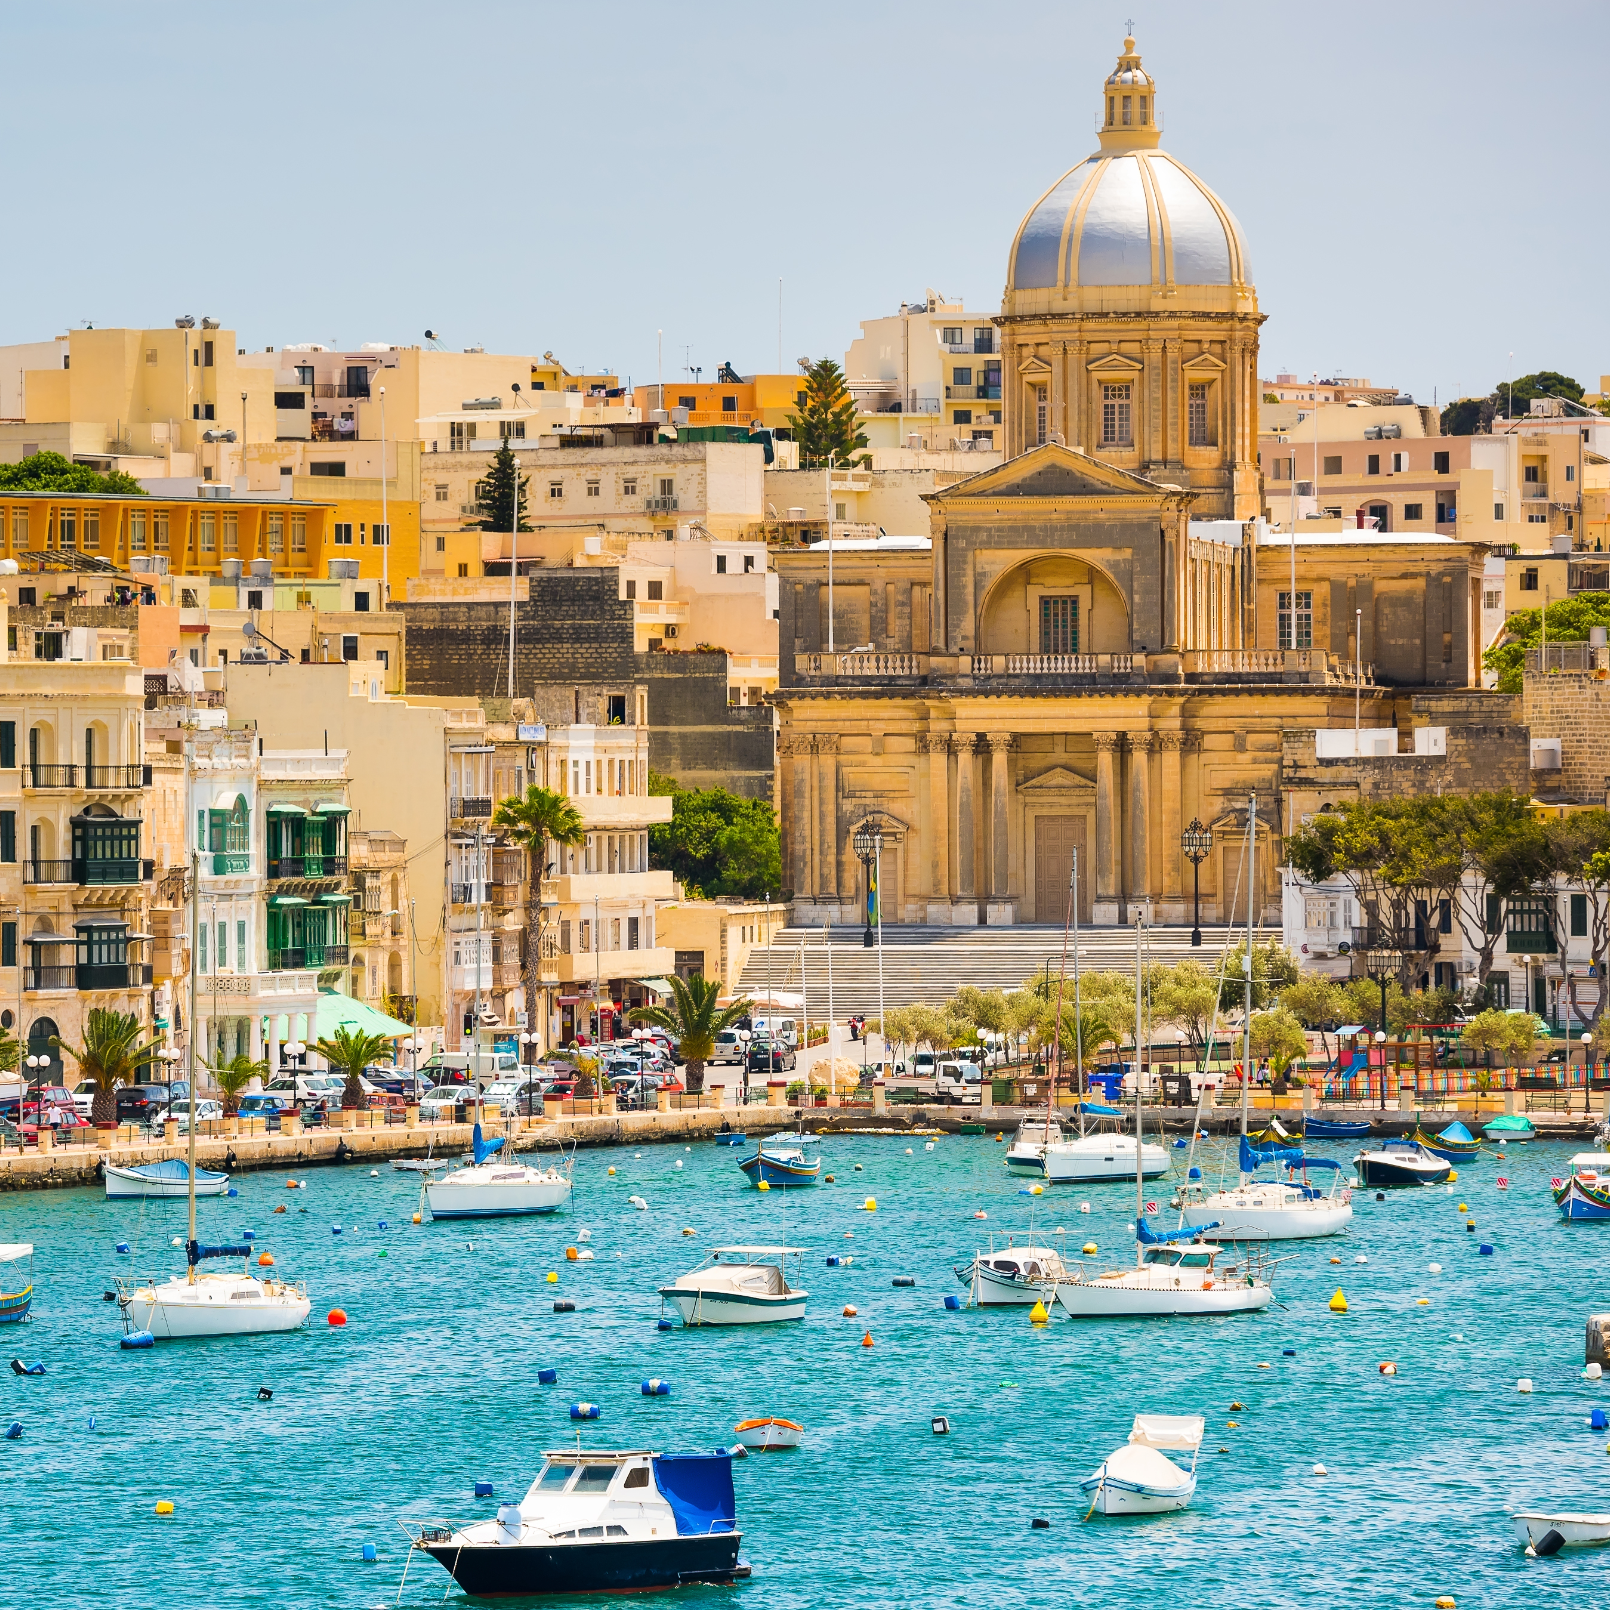 Malta's Cabinet Approves Cryptocurrency Bill